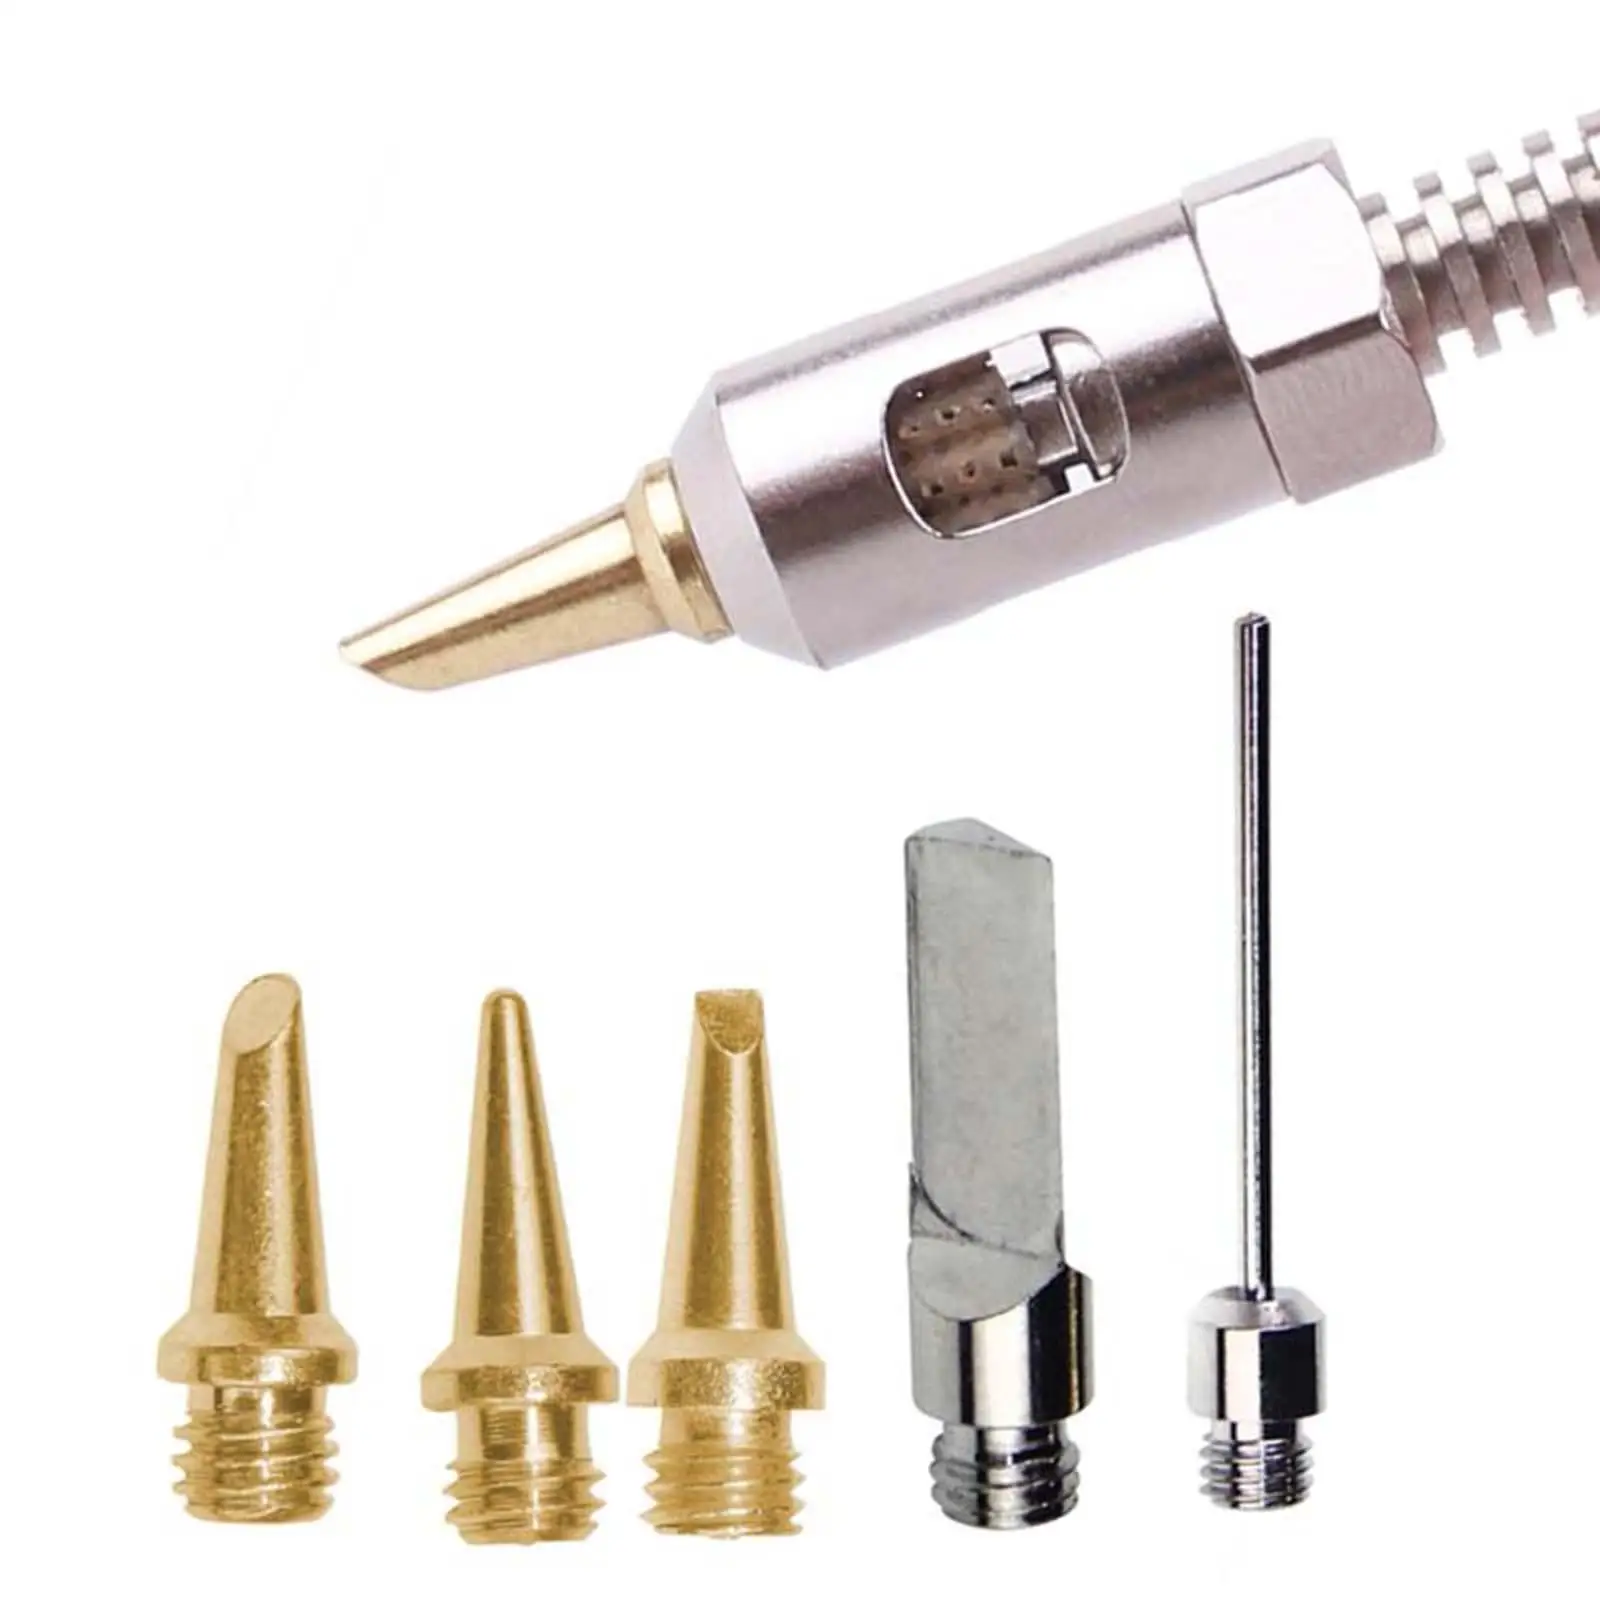 5 Pieces Soldering Iron Welding Torch Replacement Accessories